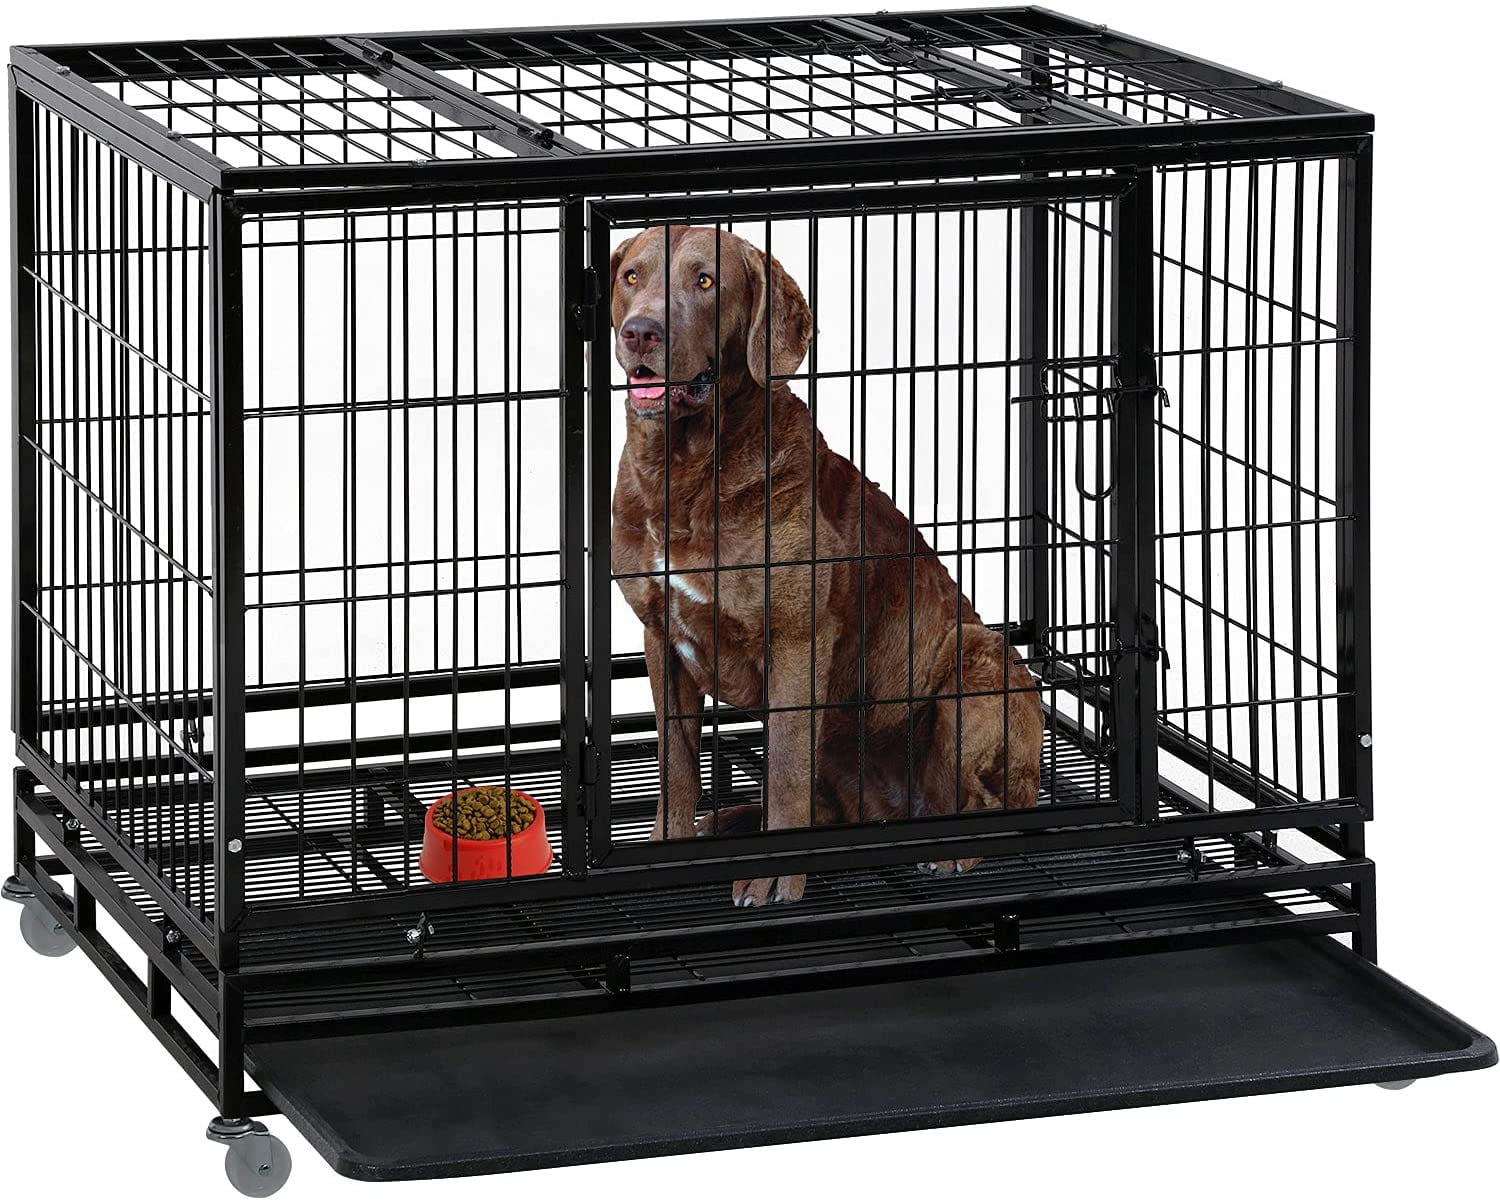 Cage Pet Supplies Dog Kennel Crate Pet Cage Tray Metal Folding 2 Doors